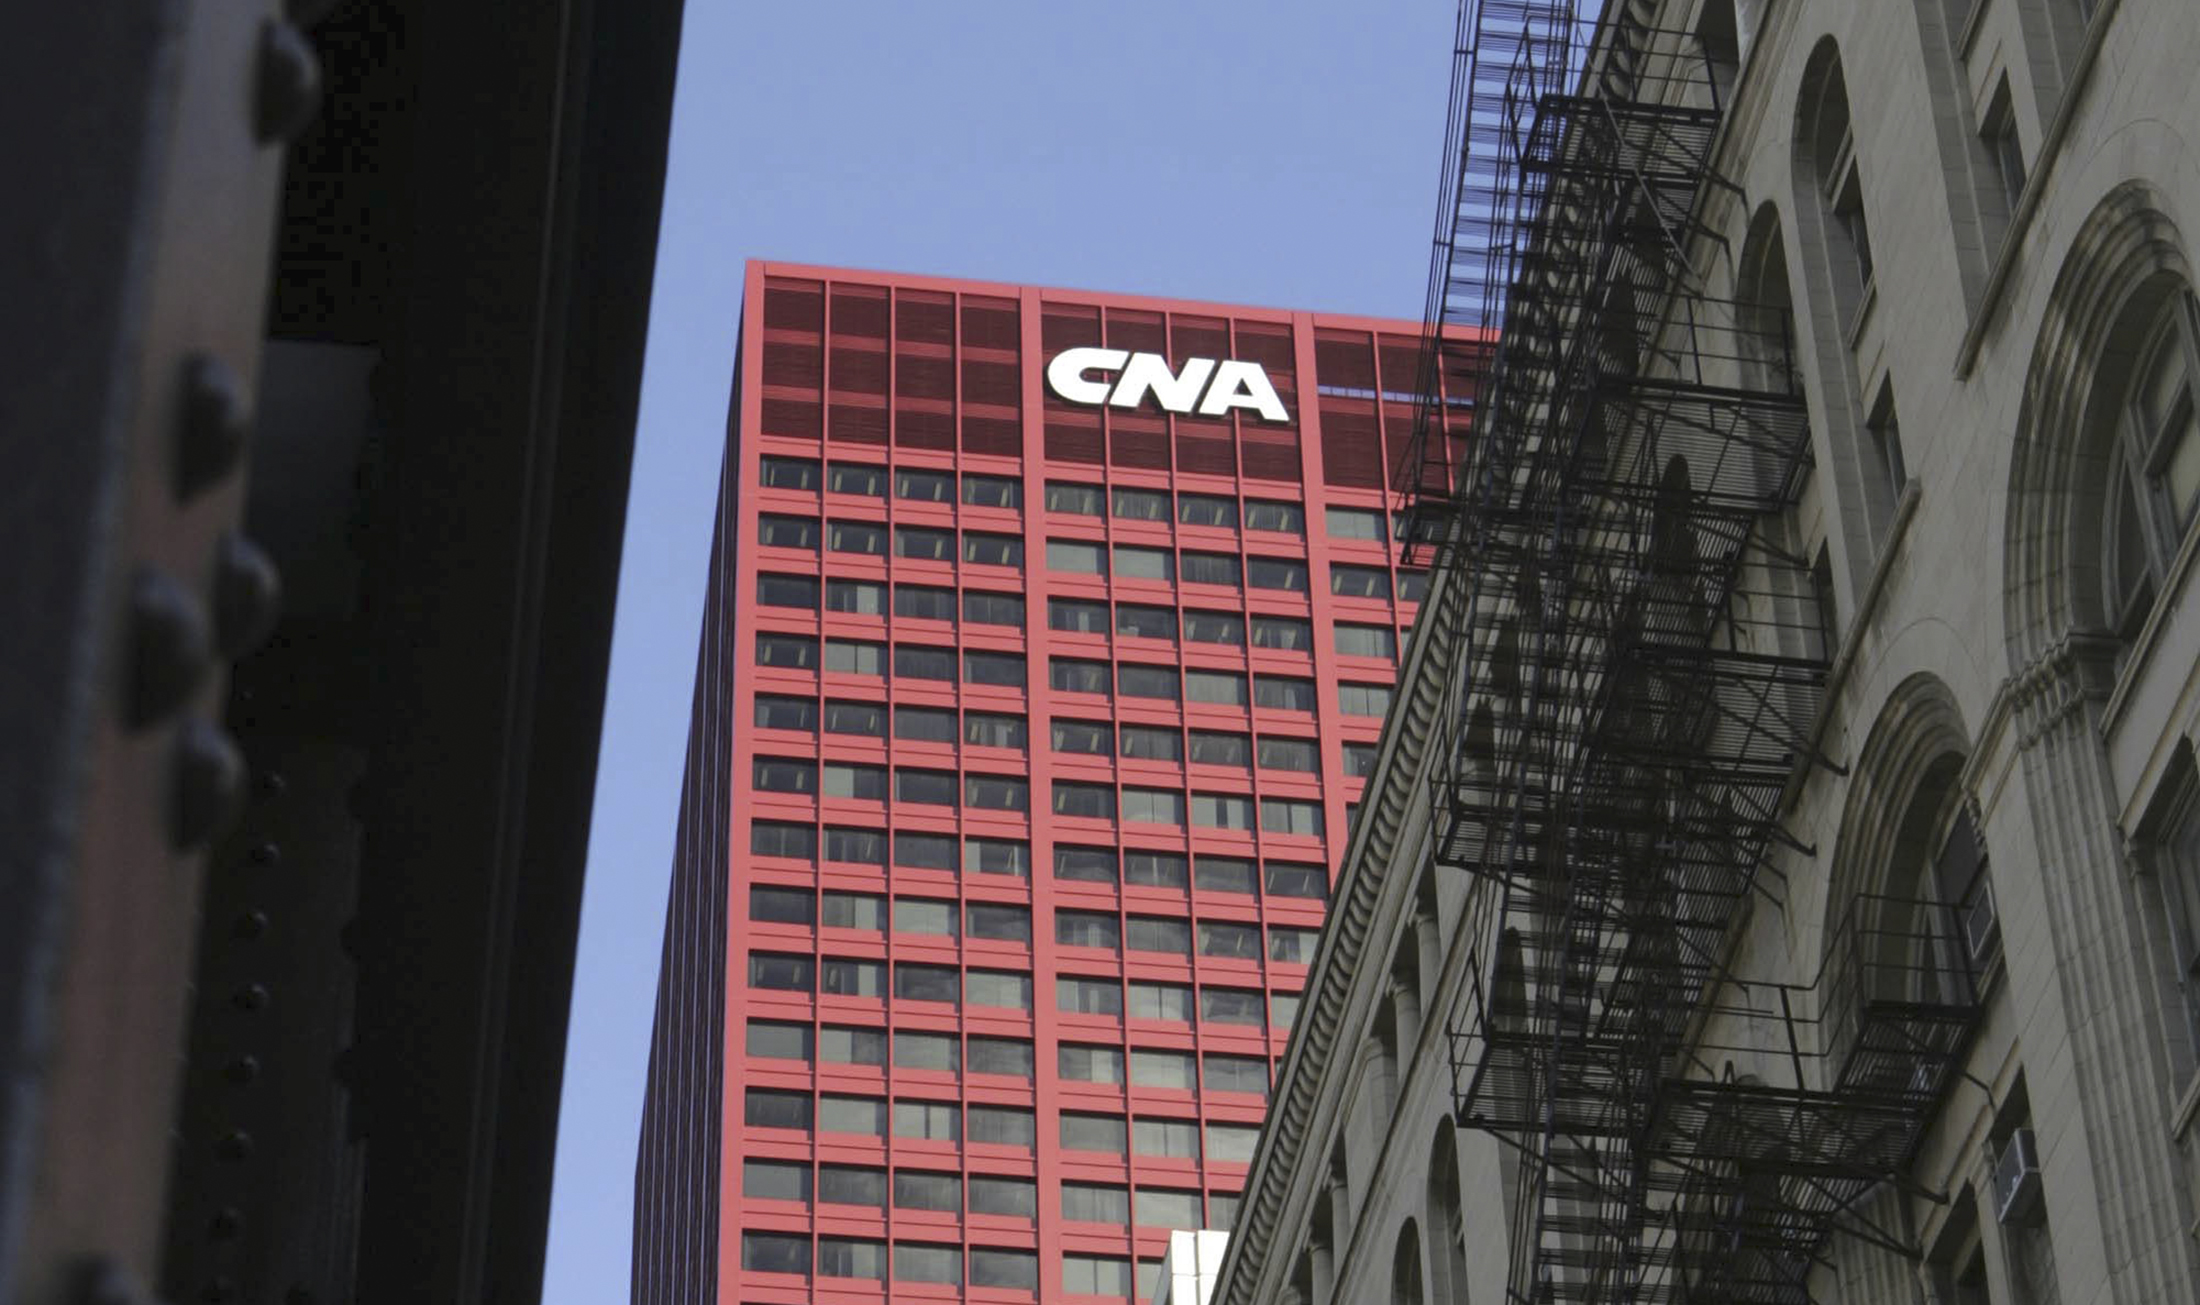 The CNA headquarters in Chicago.